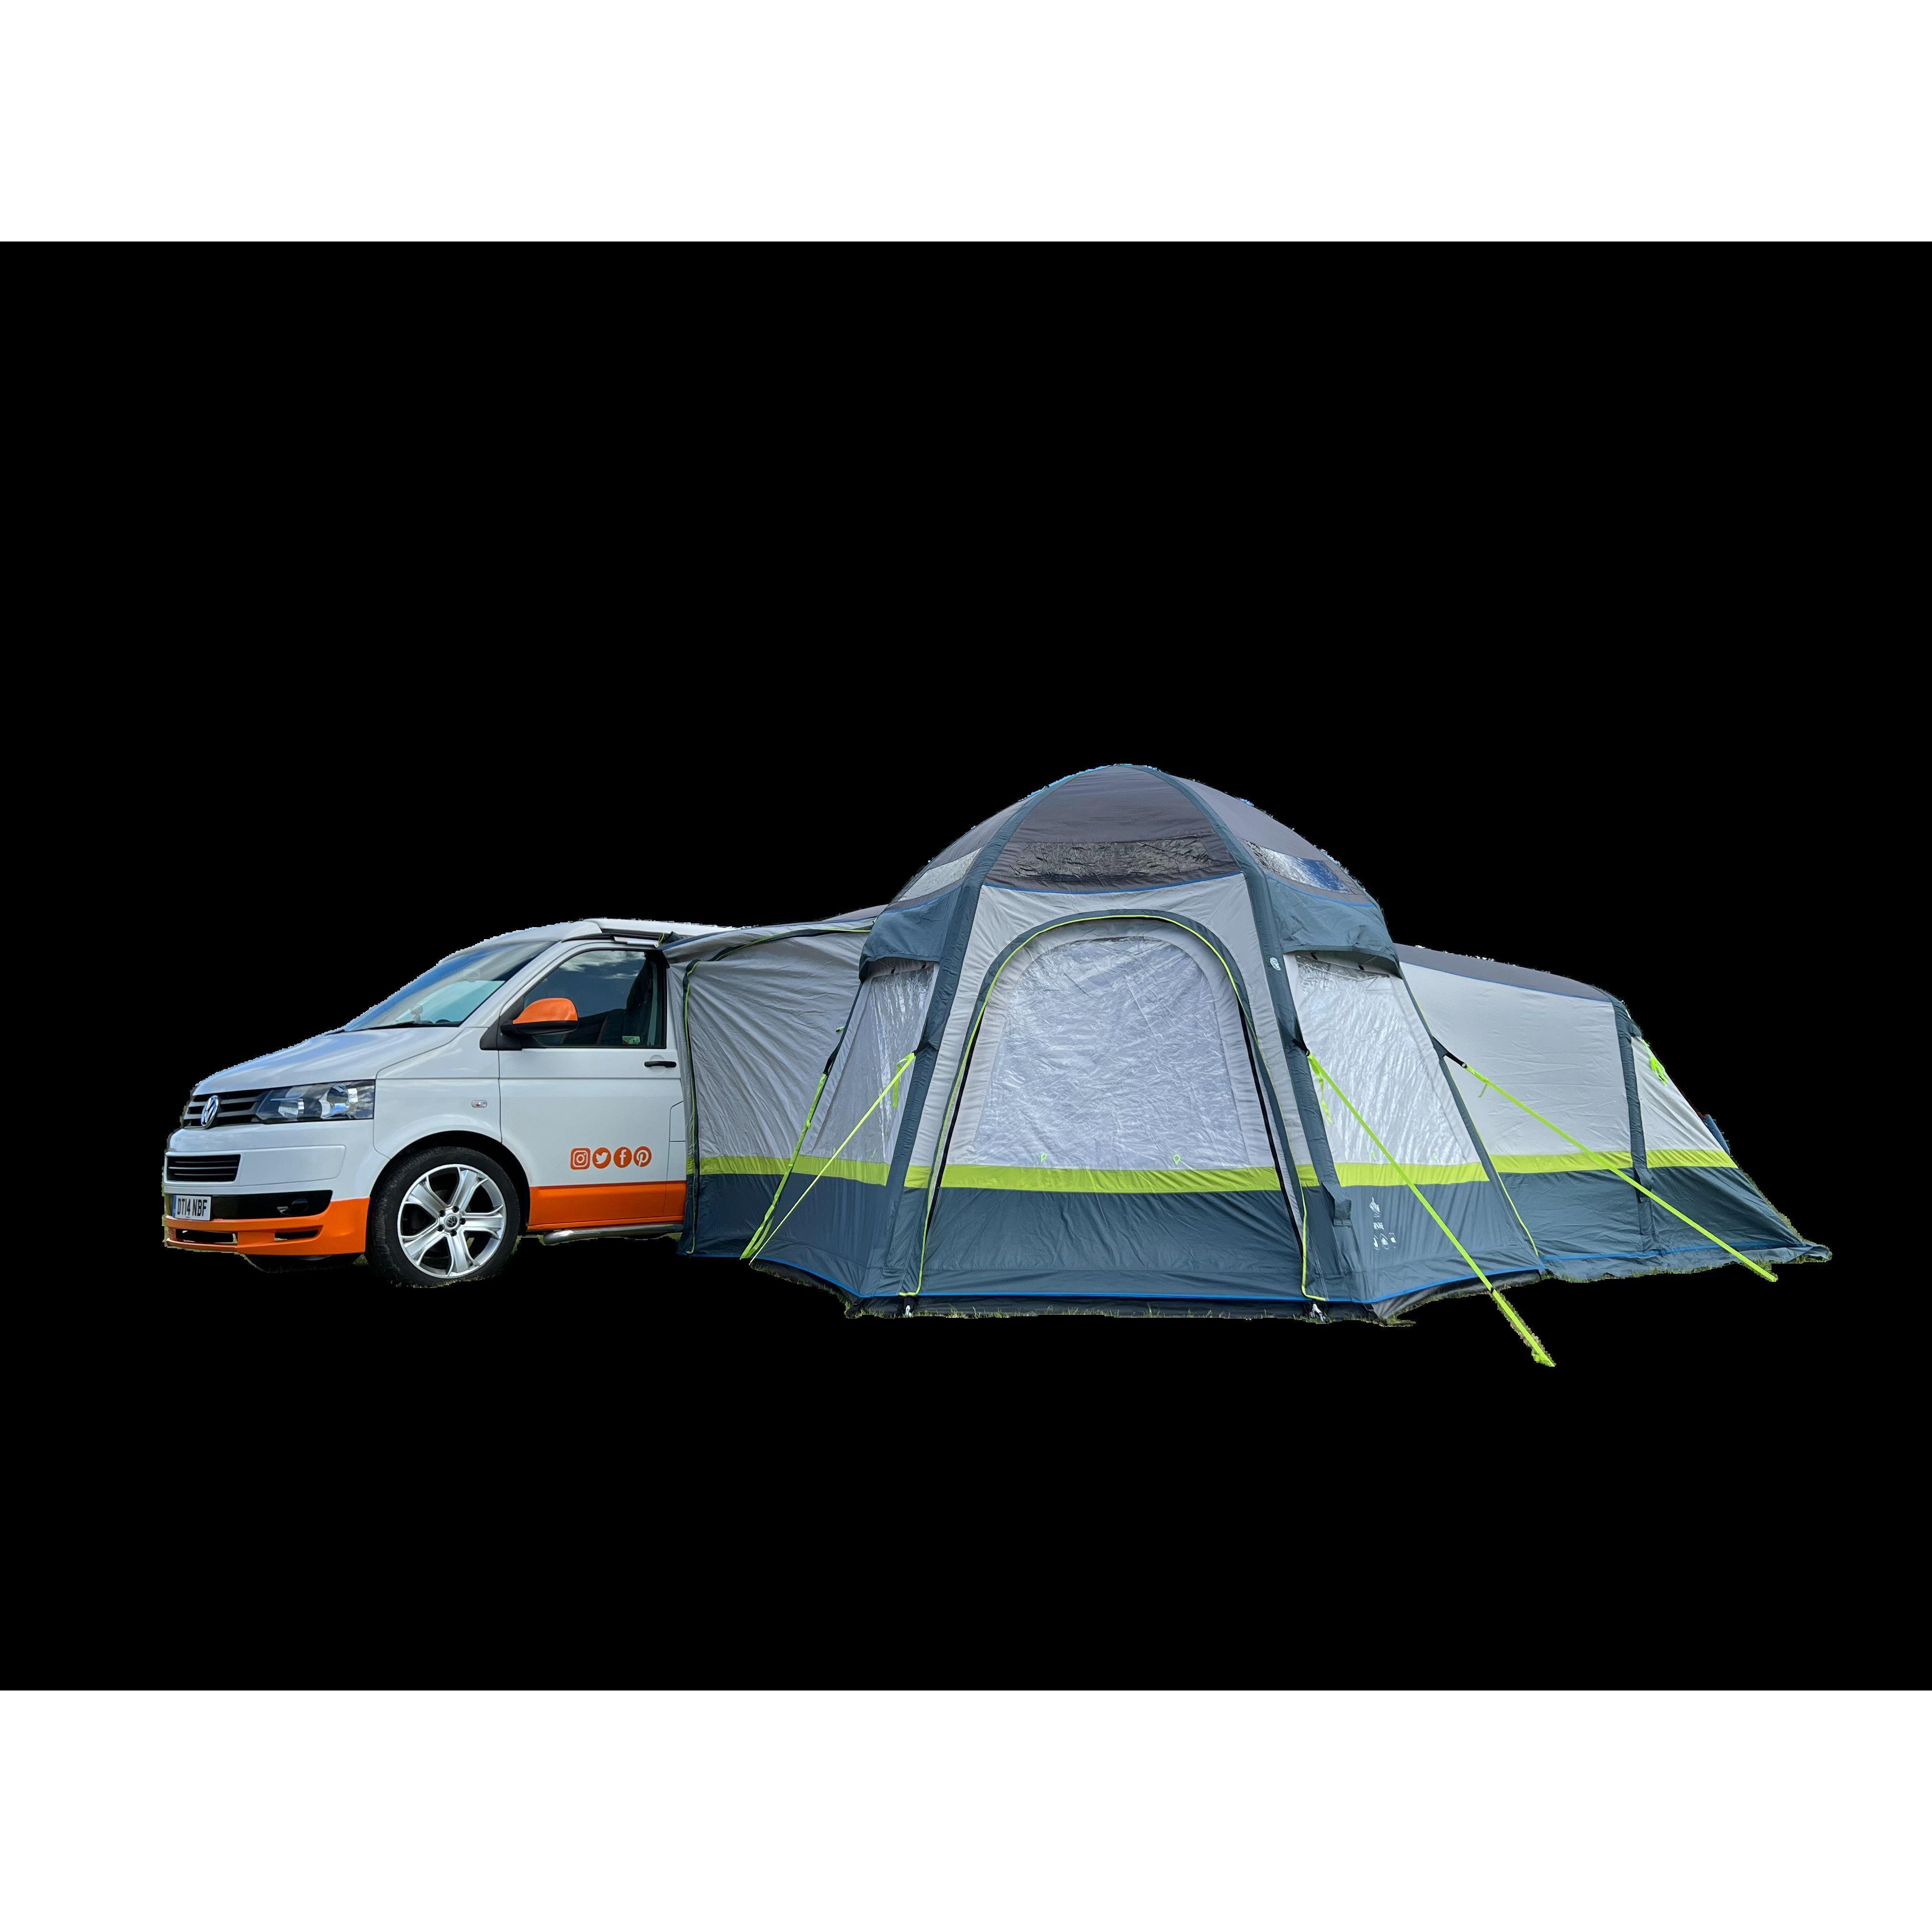 Hive Breeze - Inflatable Campervan Awning (with sleeping Pod) - image 1